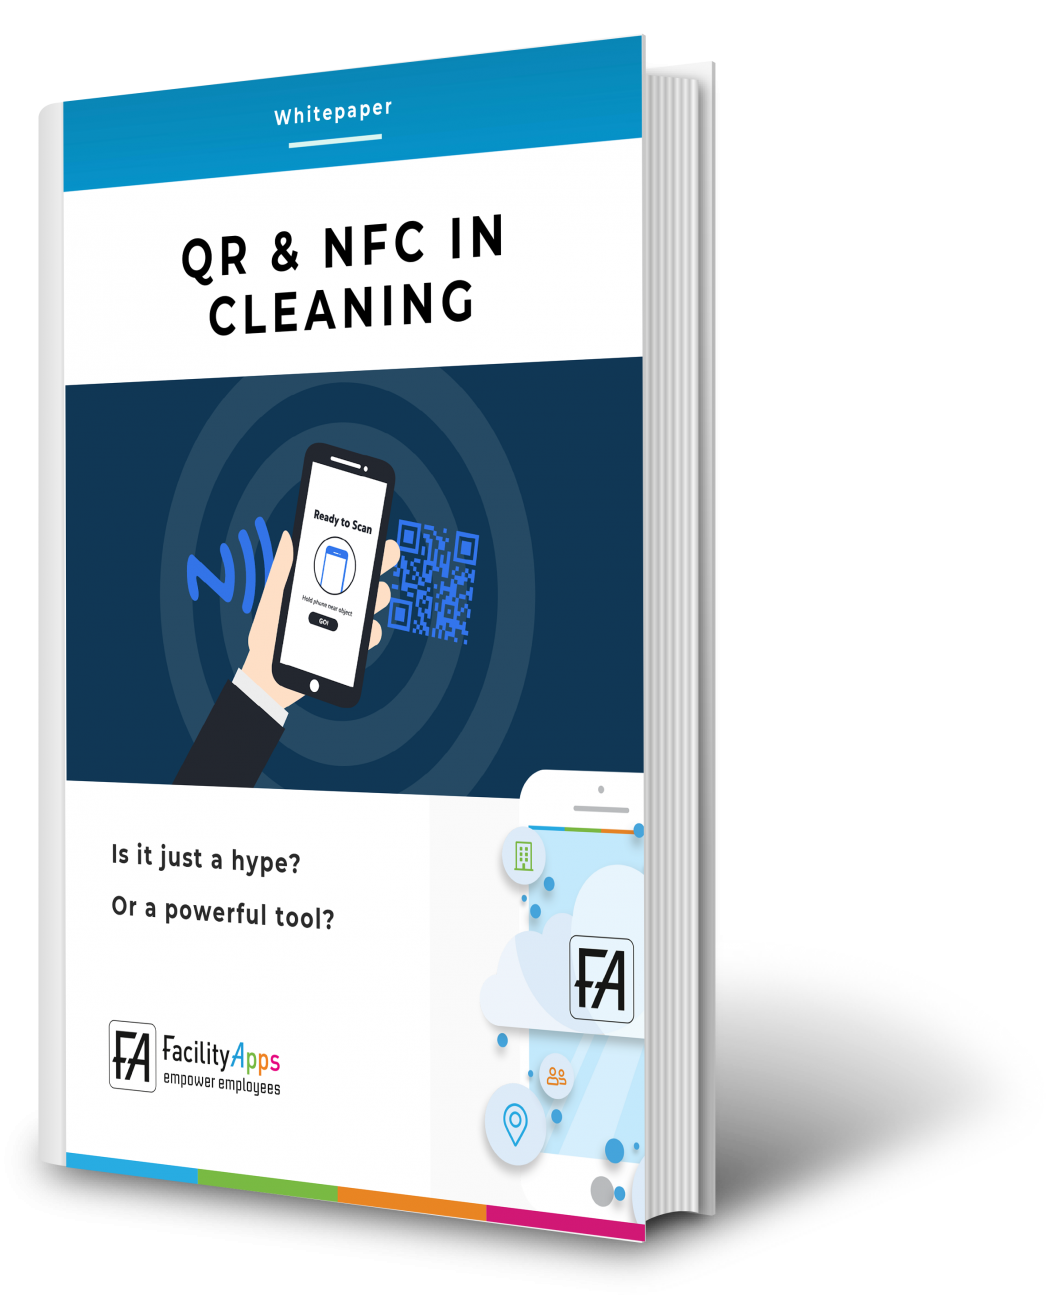 Whitepaper QR & NFC in cleaning